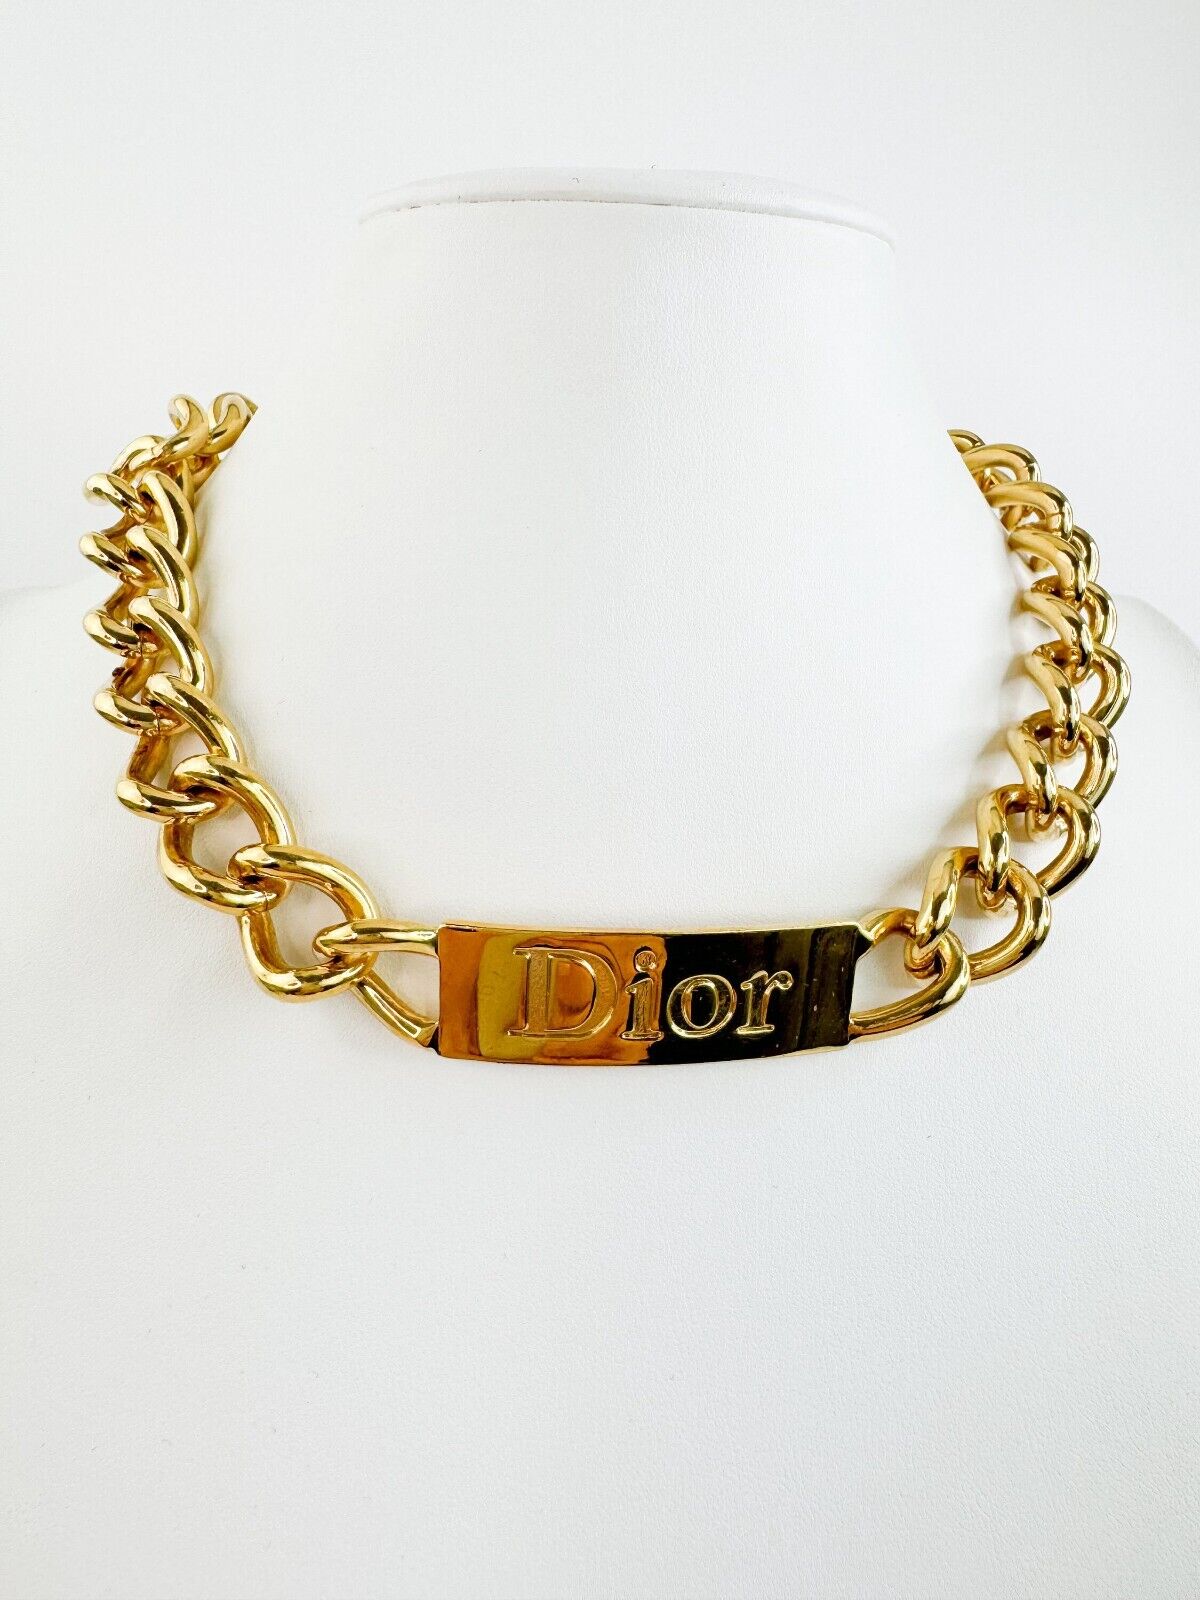 Vintage Christian Dior  ID choker Necklace, Dior Chain Necklace, Gold Tone Necklace John Galliano Dior chunky Curb necklace , Gift for her